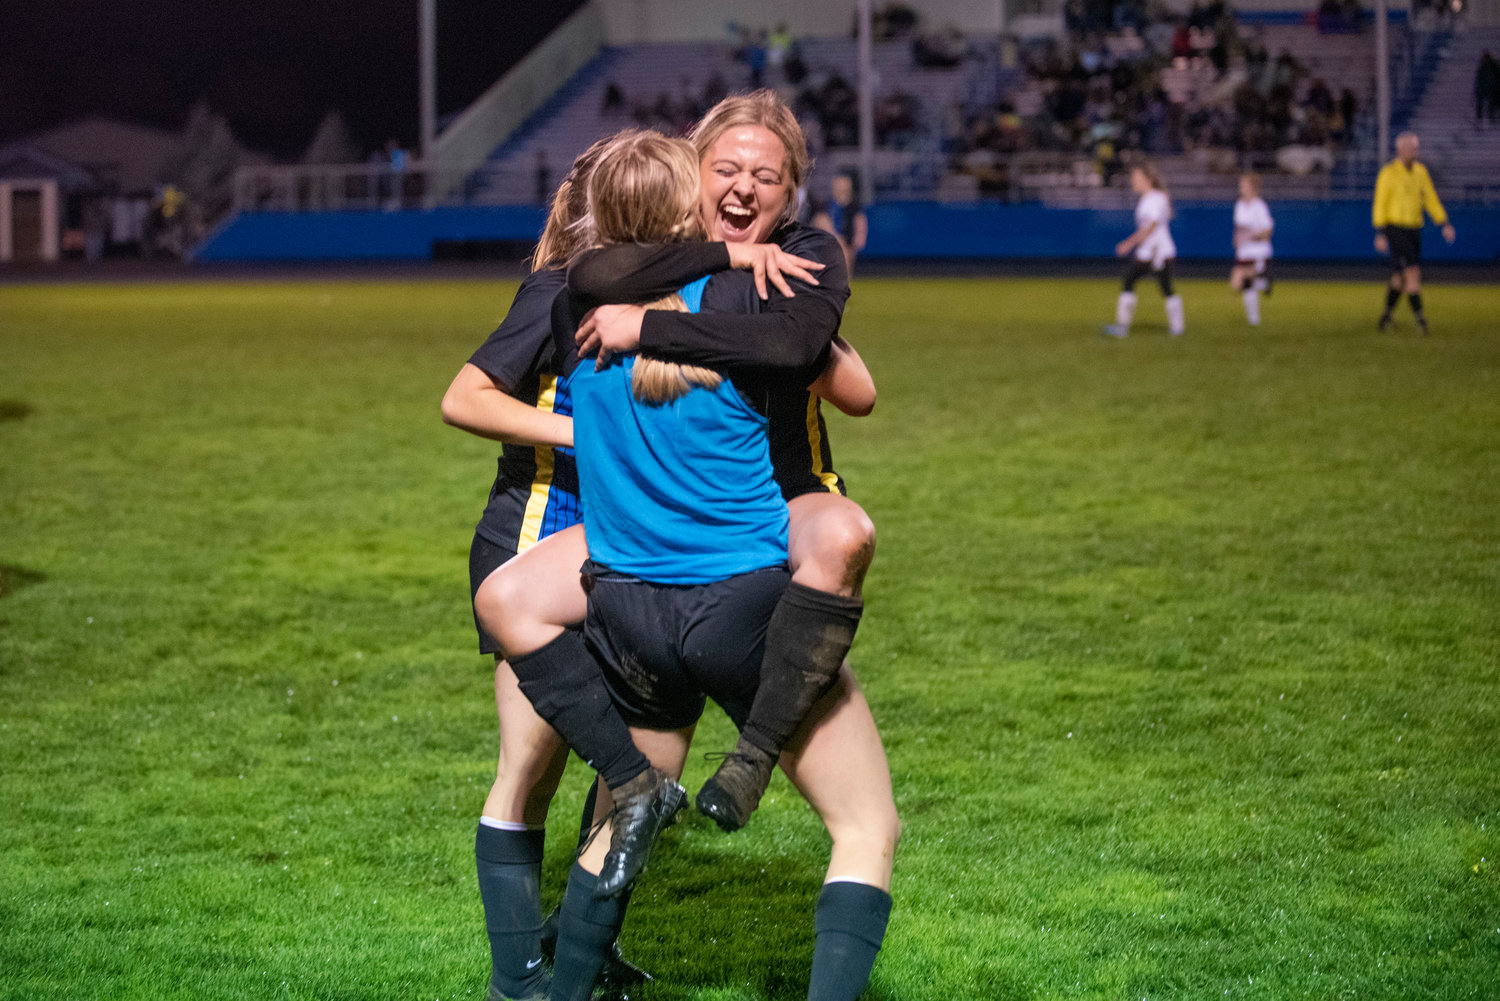 Adna senior Macy Kalnoski jumps into Lydia Tobin's arms after the Pirates defeat Stevenson, 7-0, in the opening round of districts Monday at home to secure a state playoff berth .